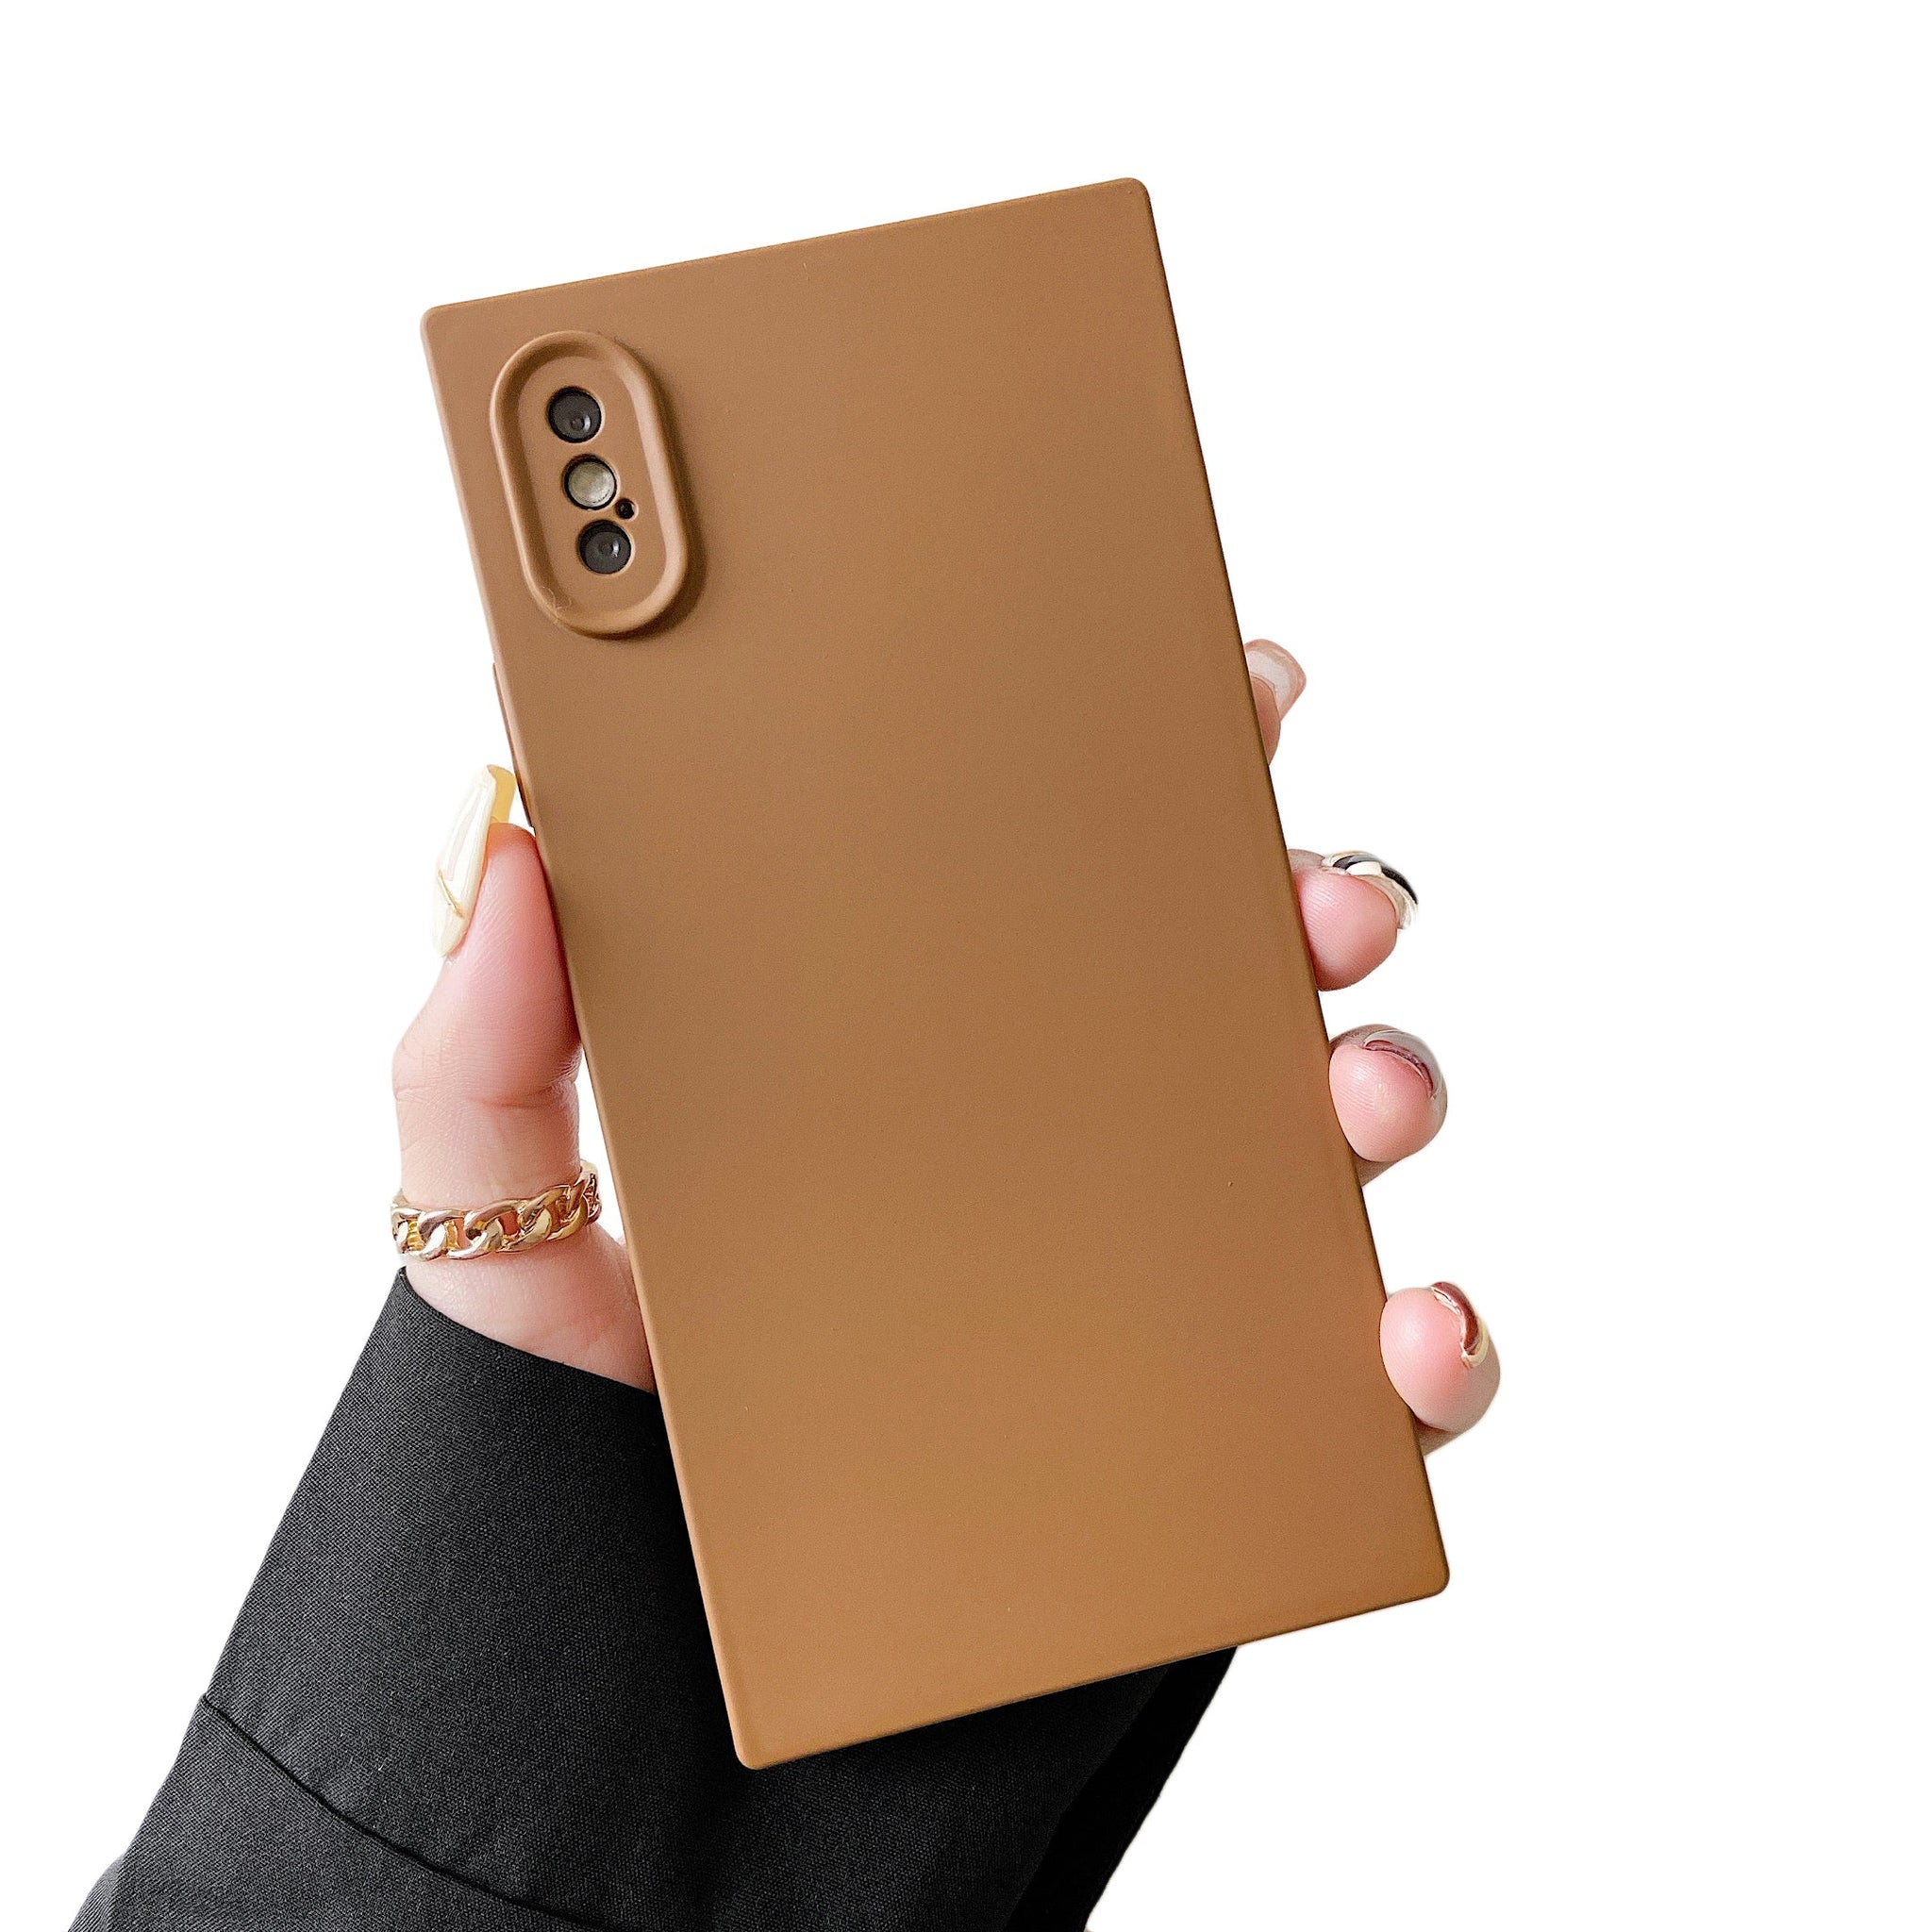 iPhone XS/iPhone X Case Square Silicone Camera Protector (Coffee Brown)